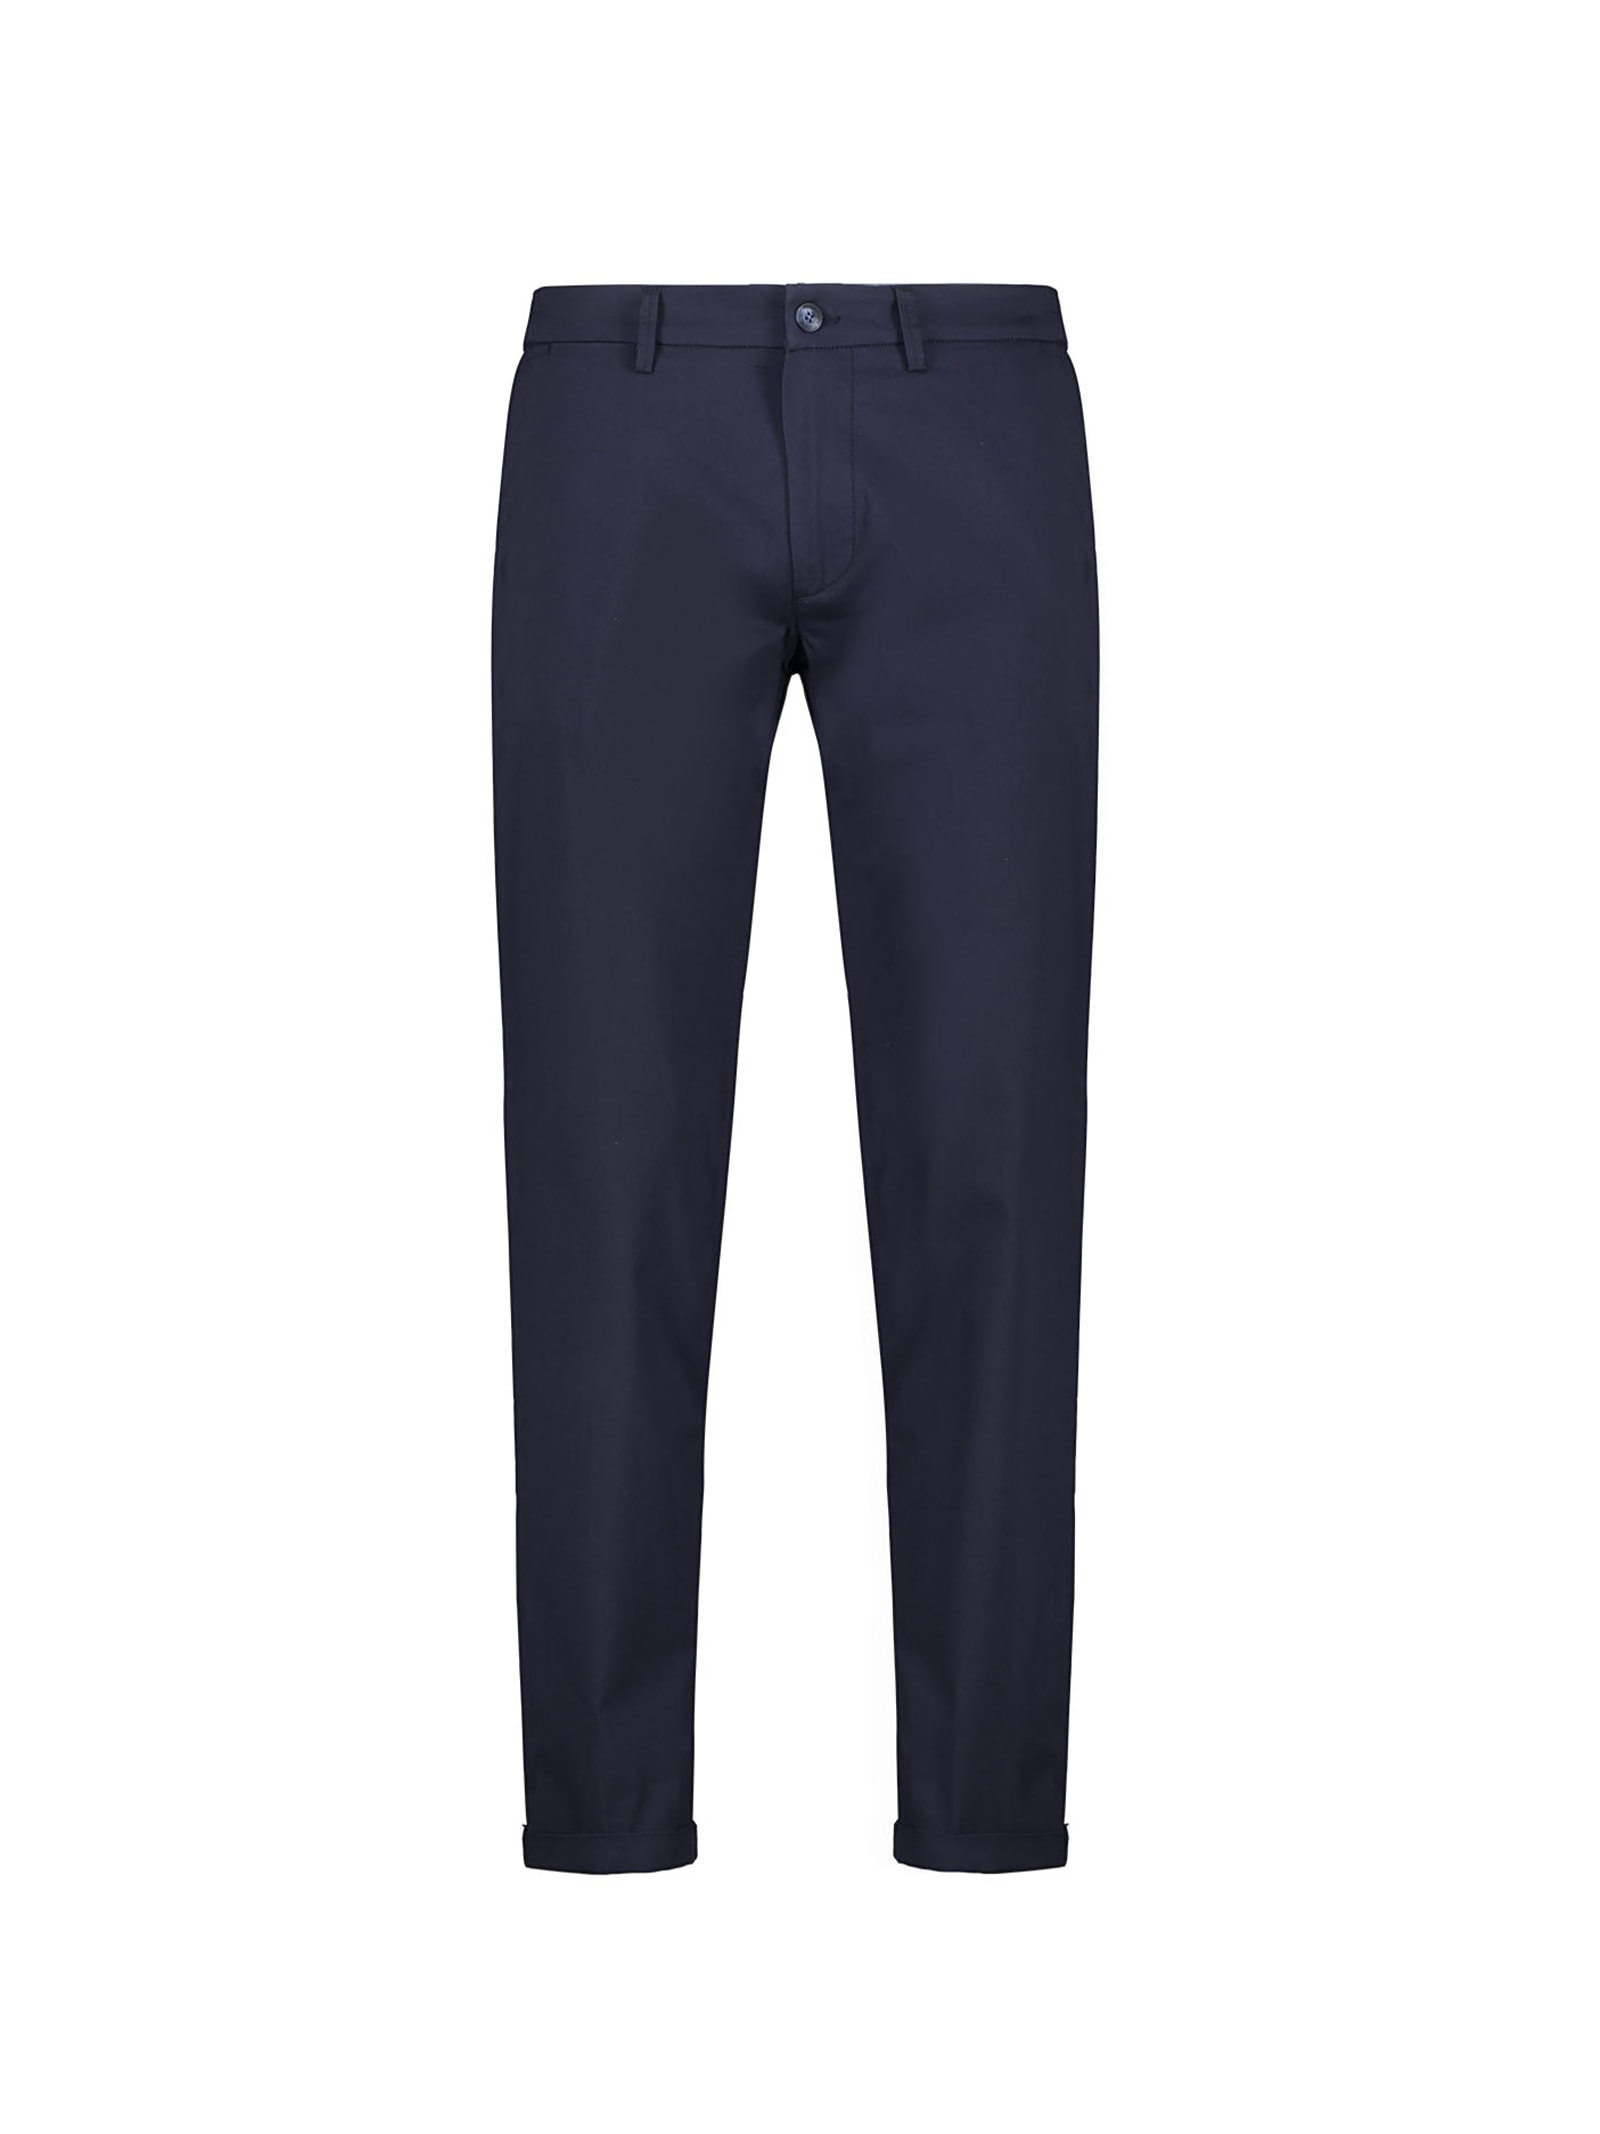 Re-HasH Navy Blue Mucha Trousers